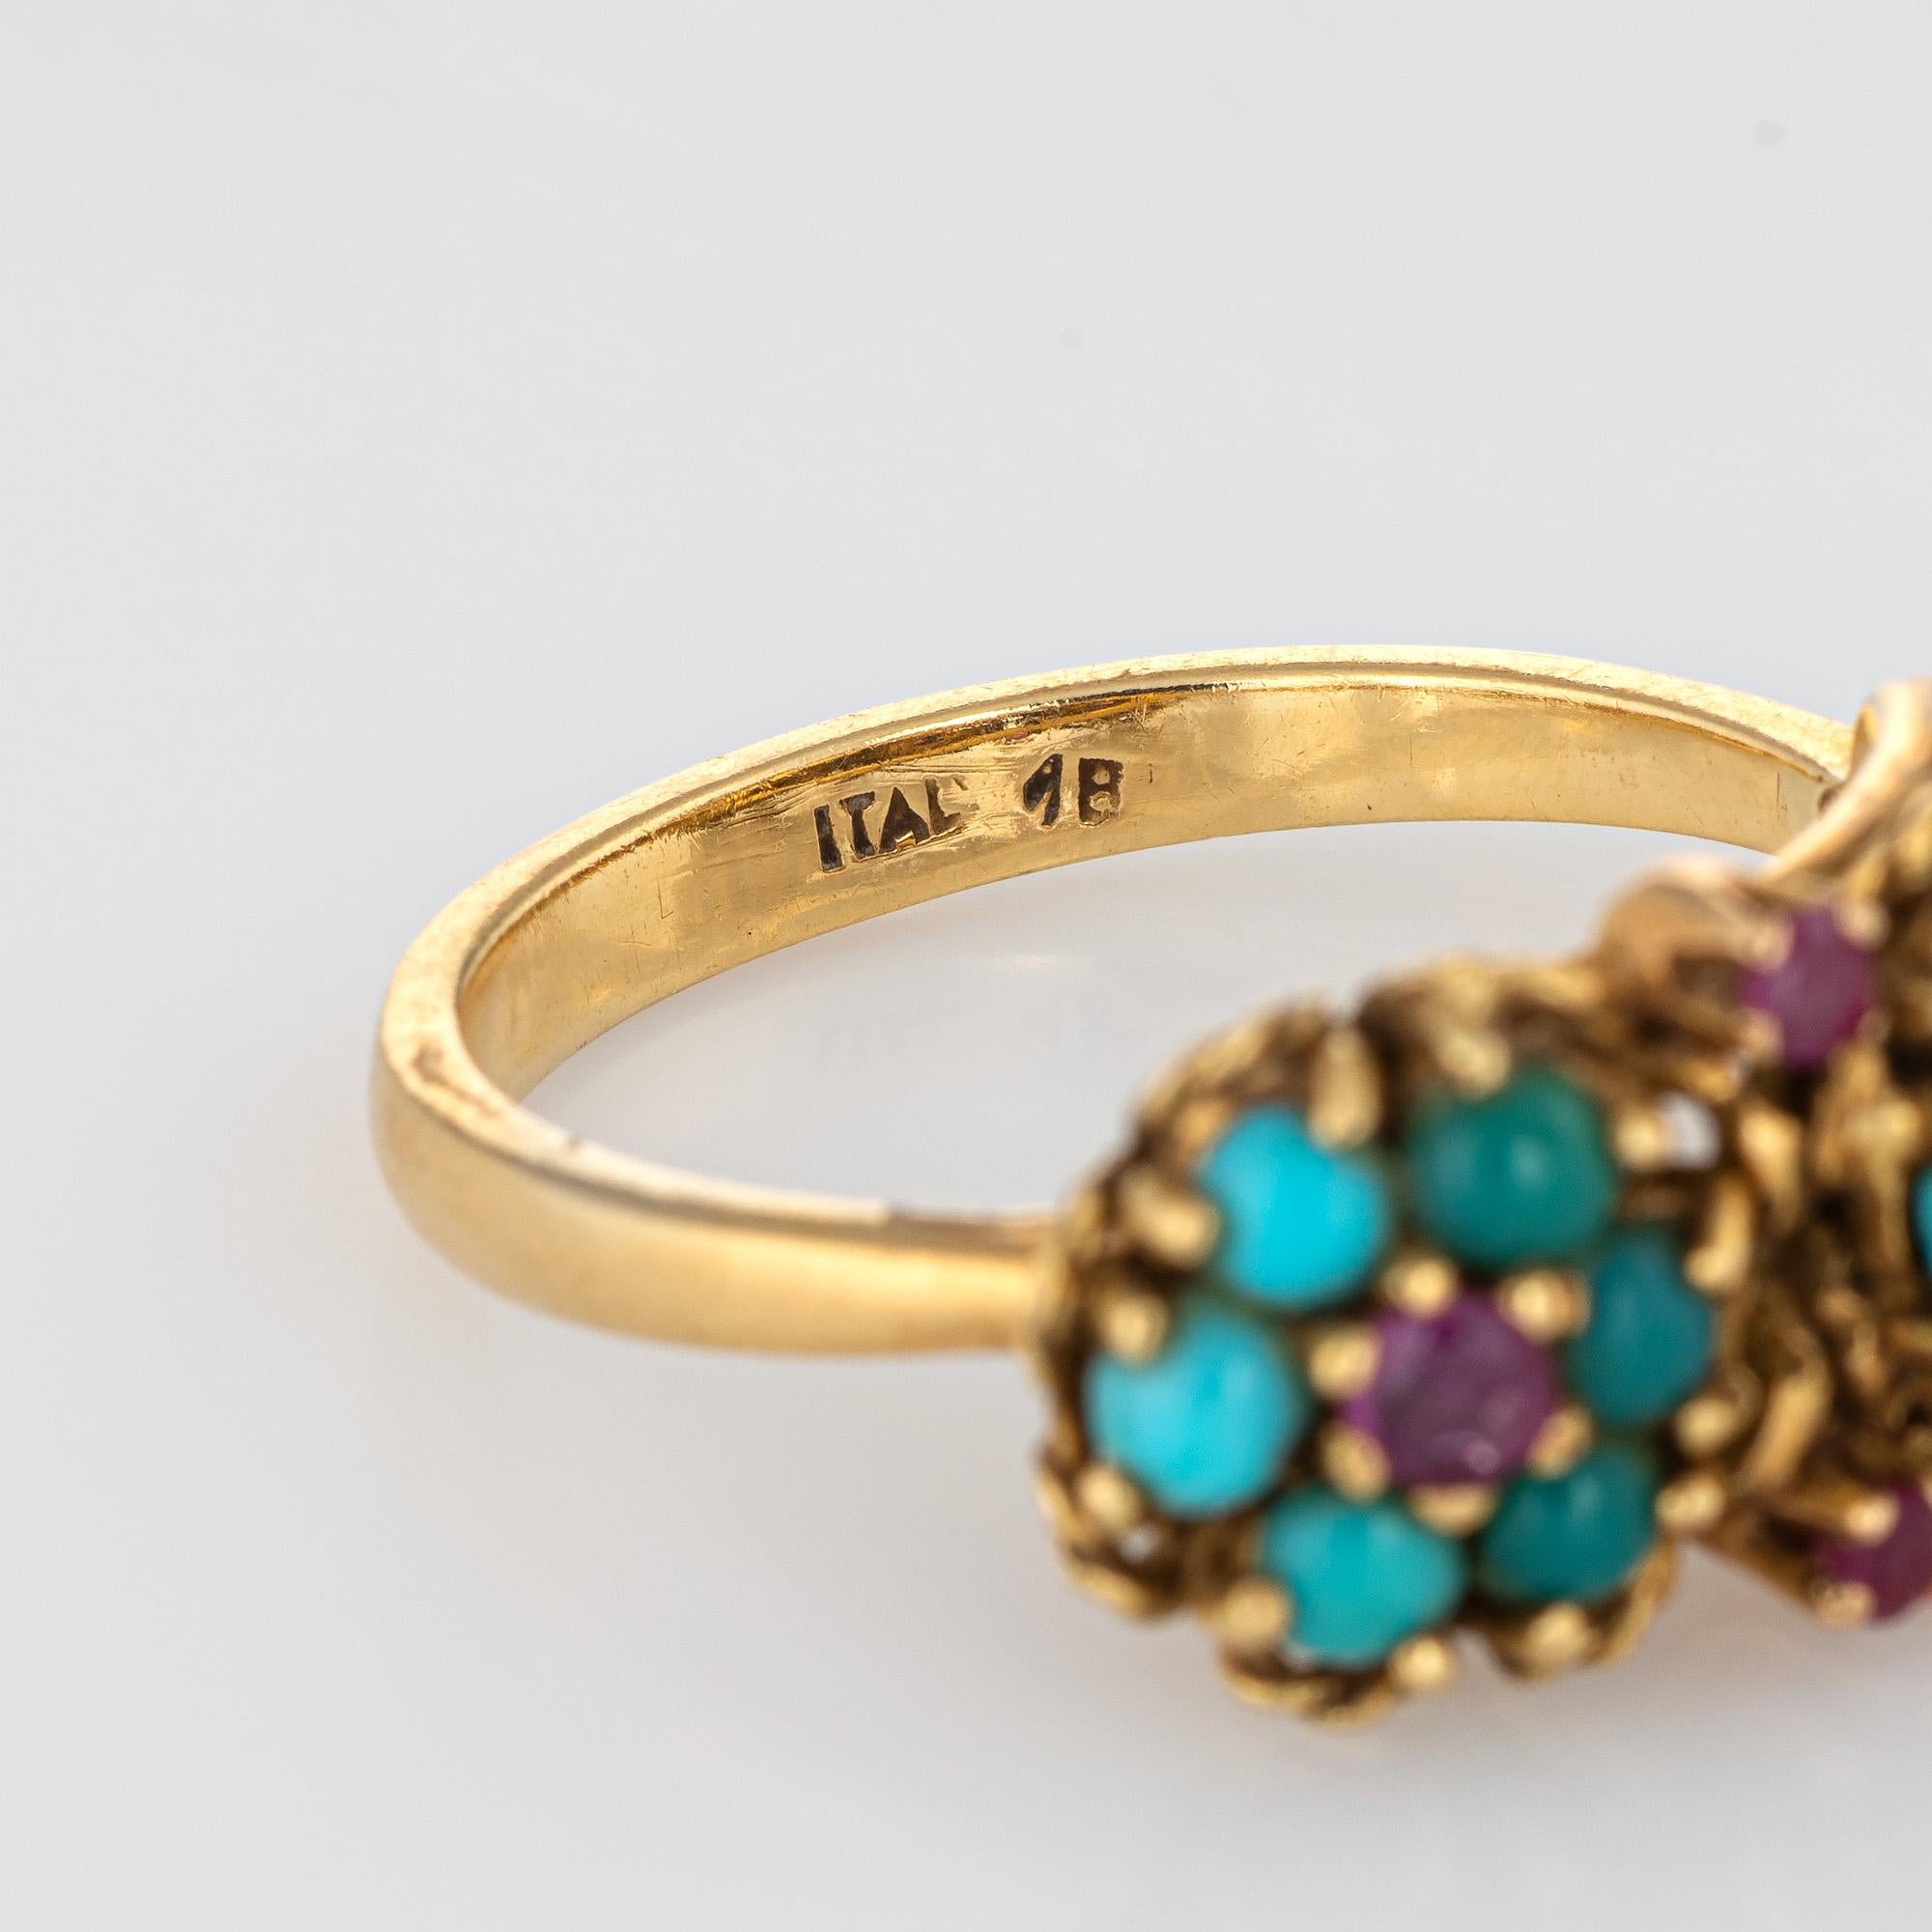 Cabochon Turquoise Ruby Flower Ring Vintage 1960s 18 Karat Yellow Gold Estate Jewelry